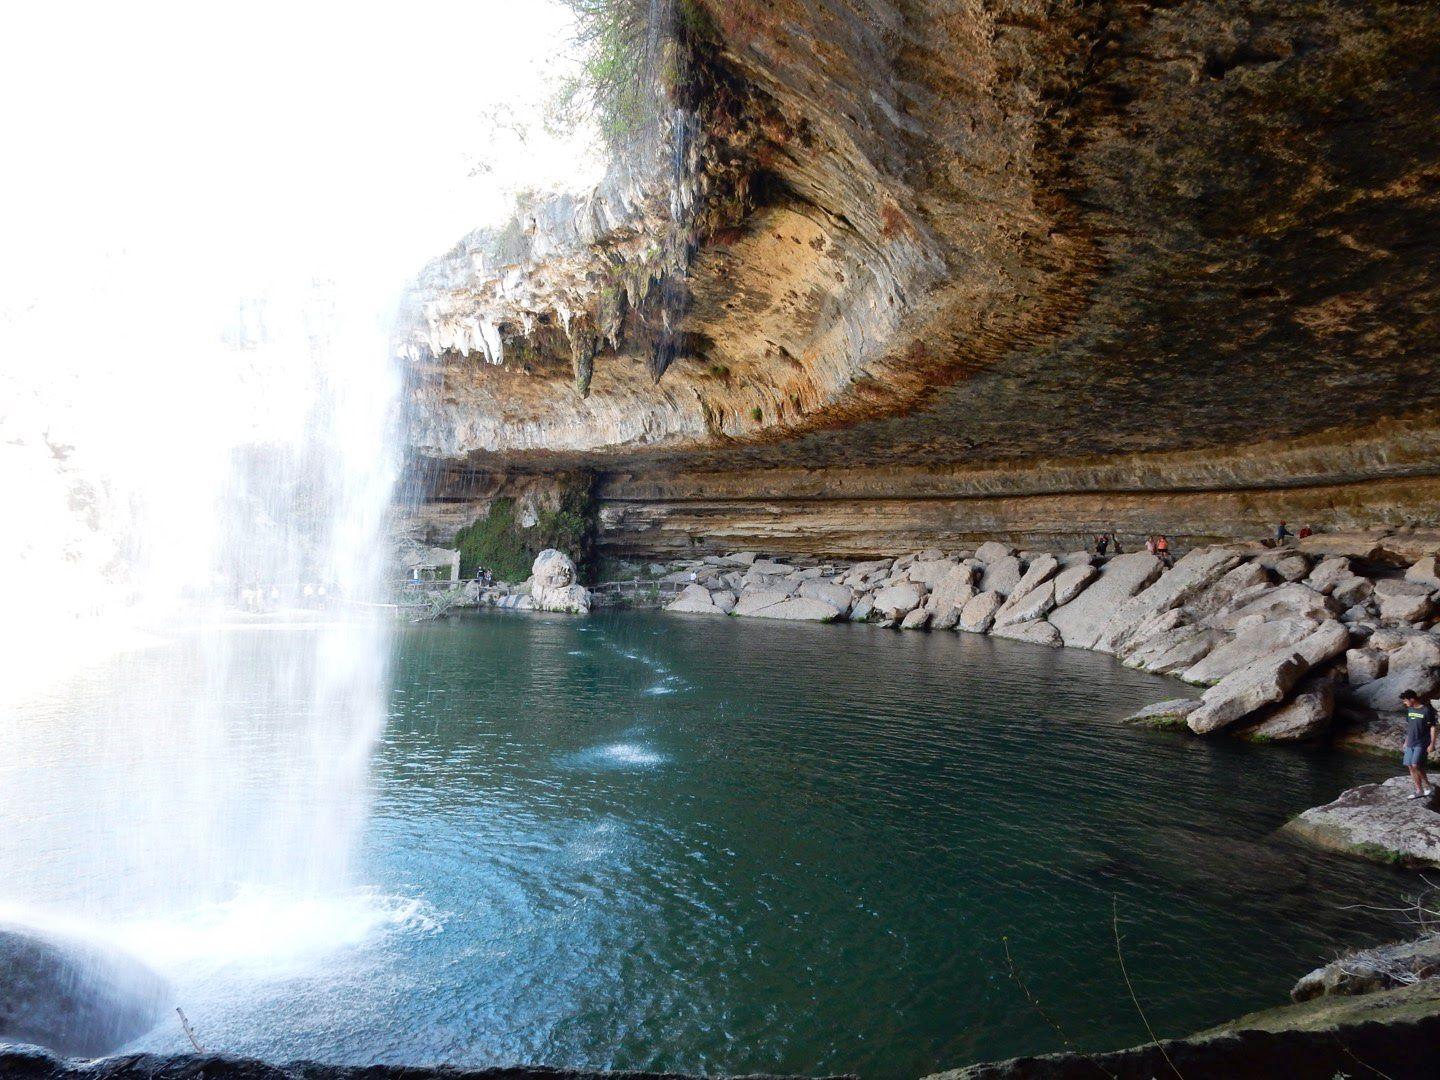 A pool area with a cave overhang